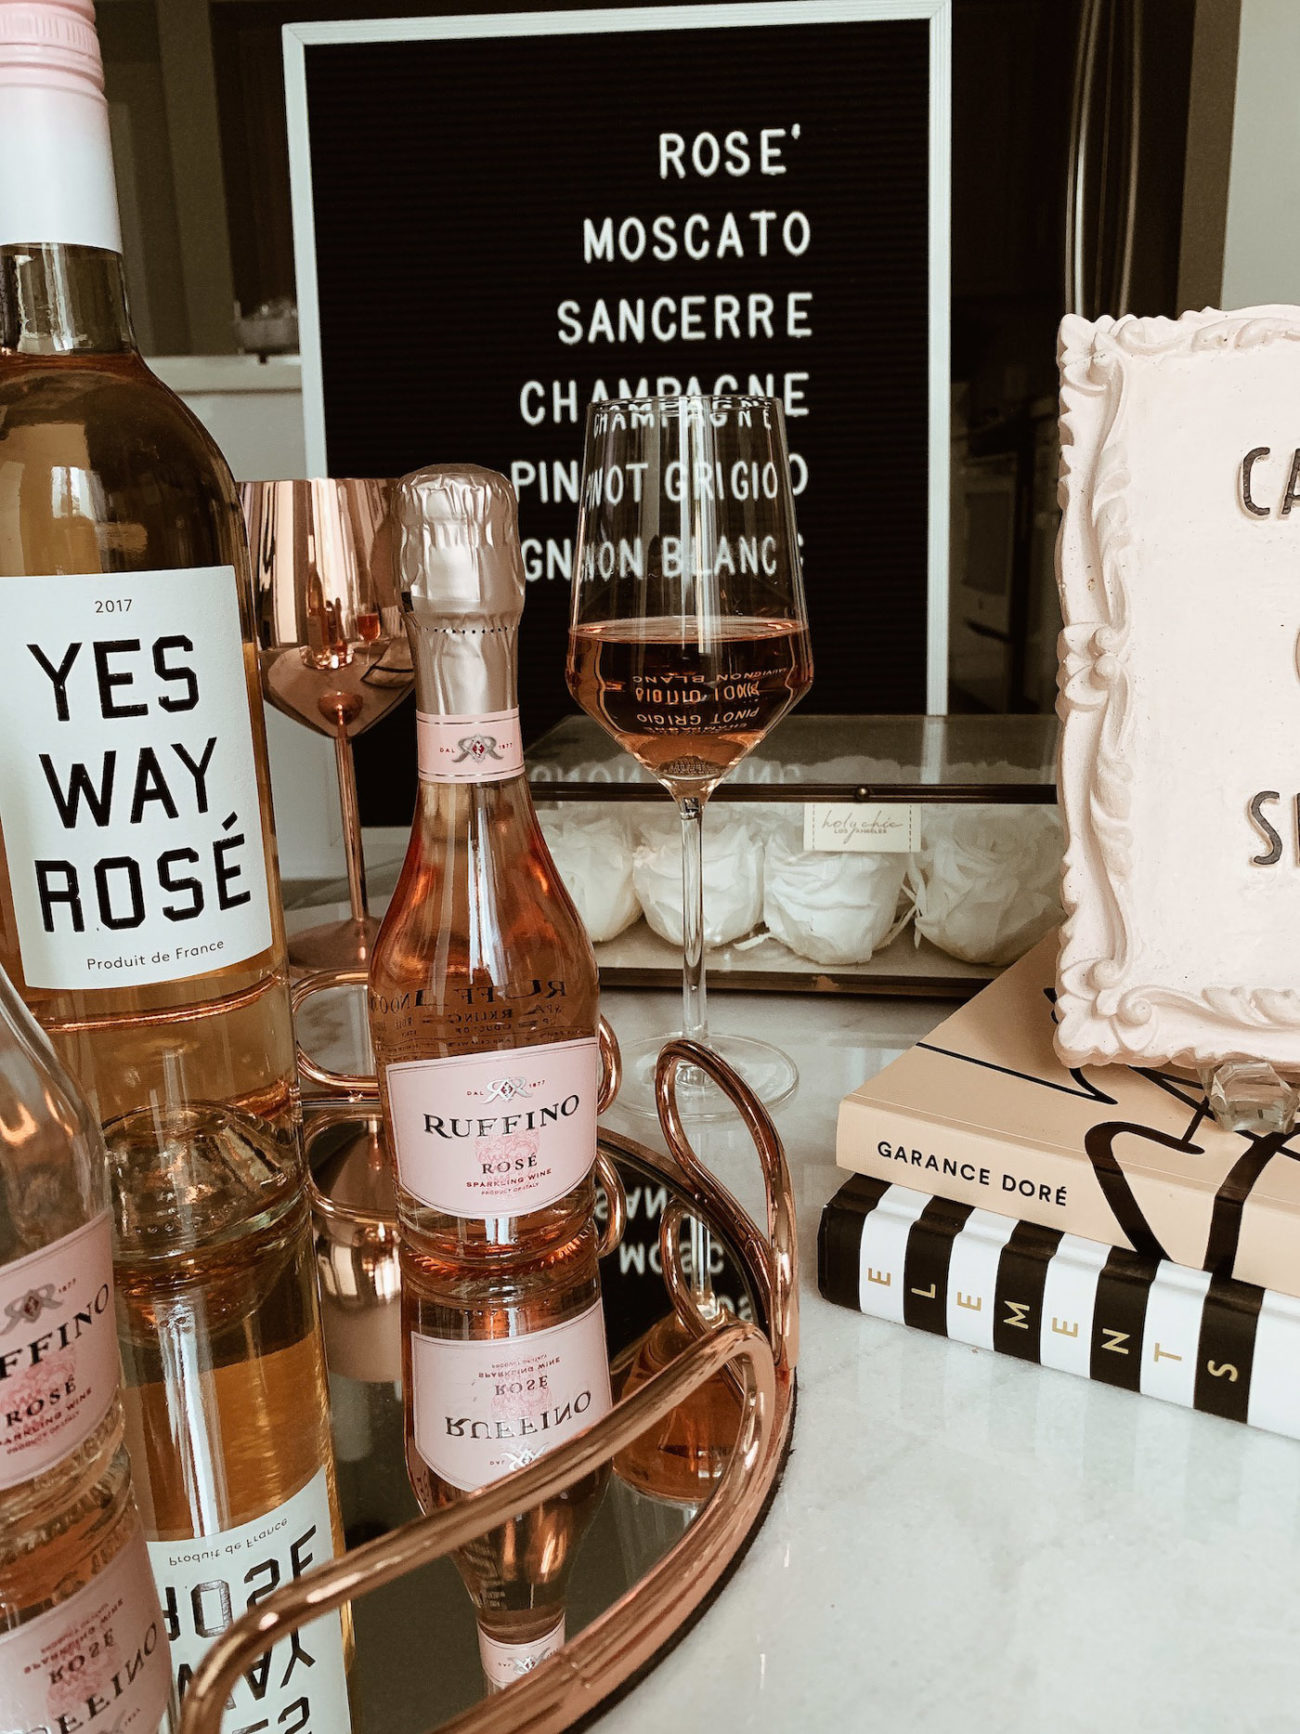 List of My Favorite Wine | Yes Way Rosé | Sauvignon Blanc | Blondie in the City by Hayley Larue